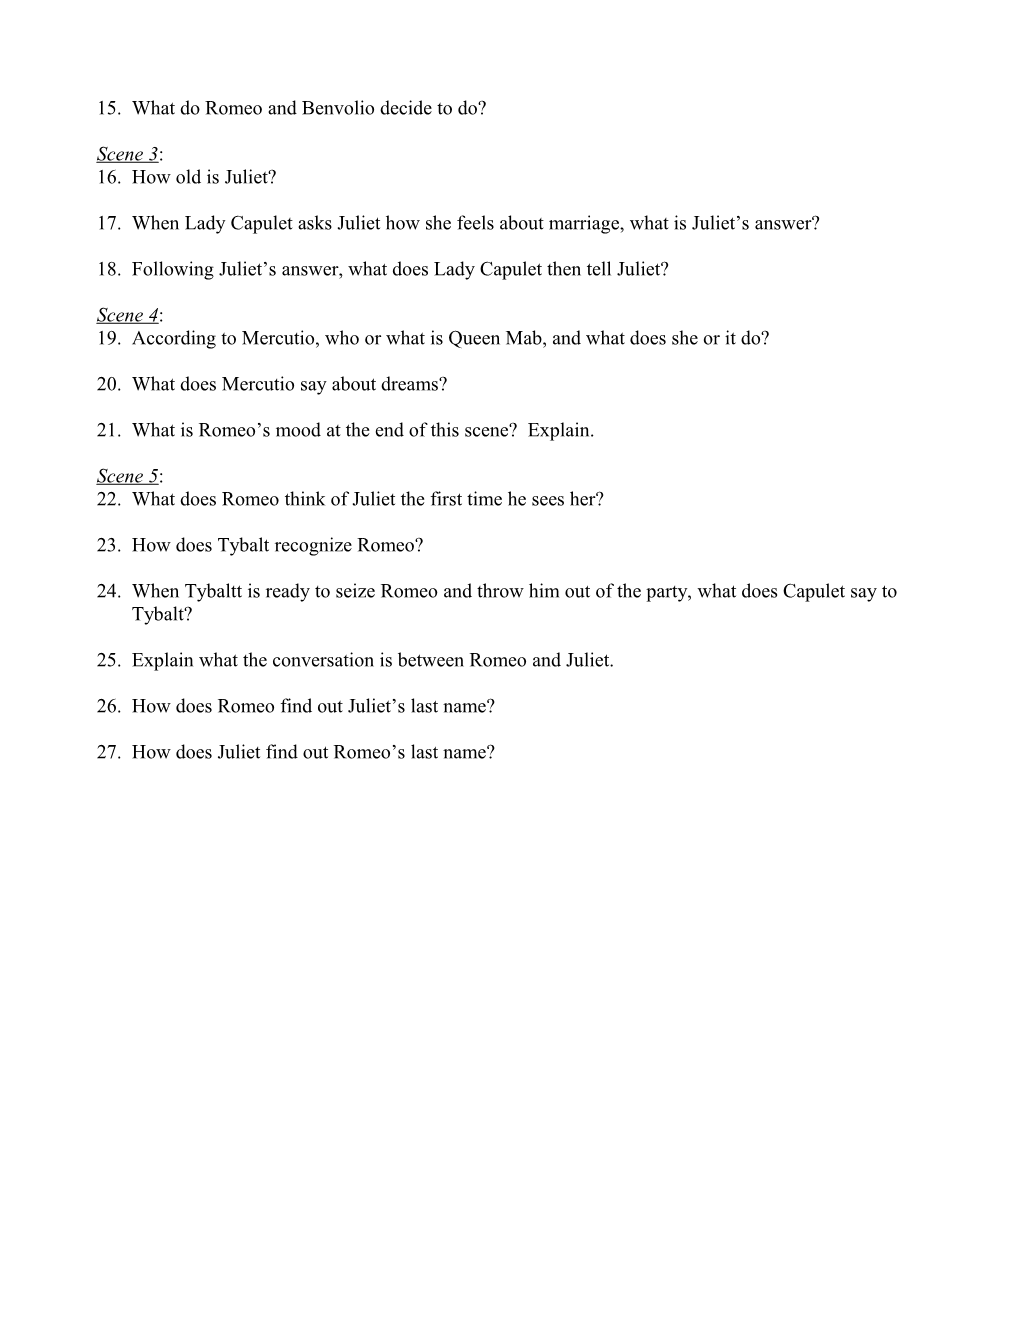 ROMEO and JULIET : Act I Reading and Study Guide